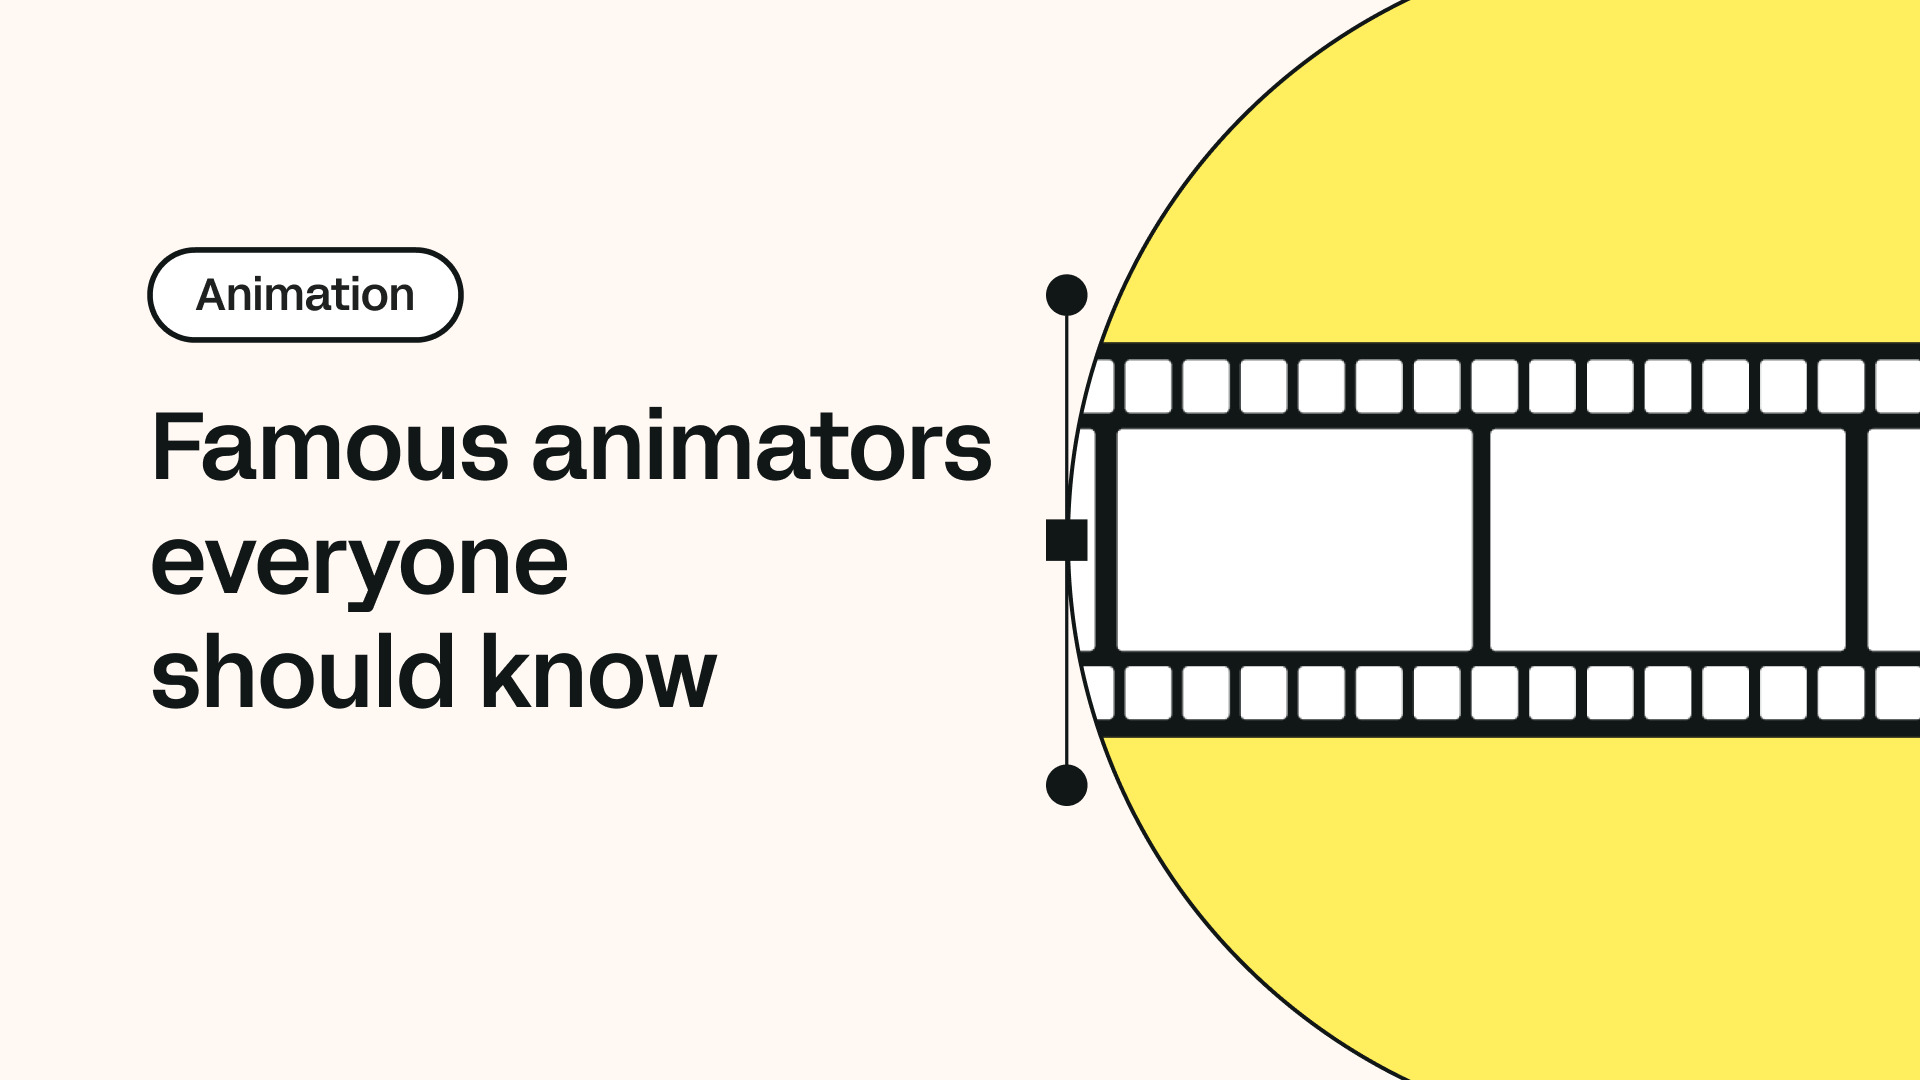 17 famous animators everyone should know | Linearity